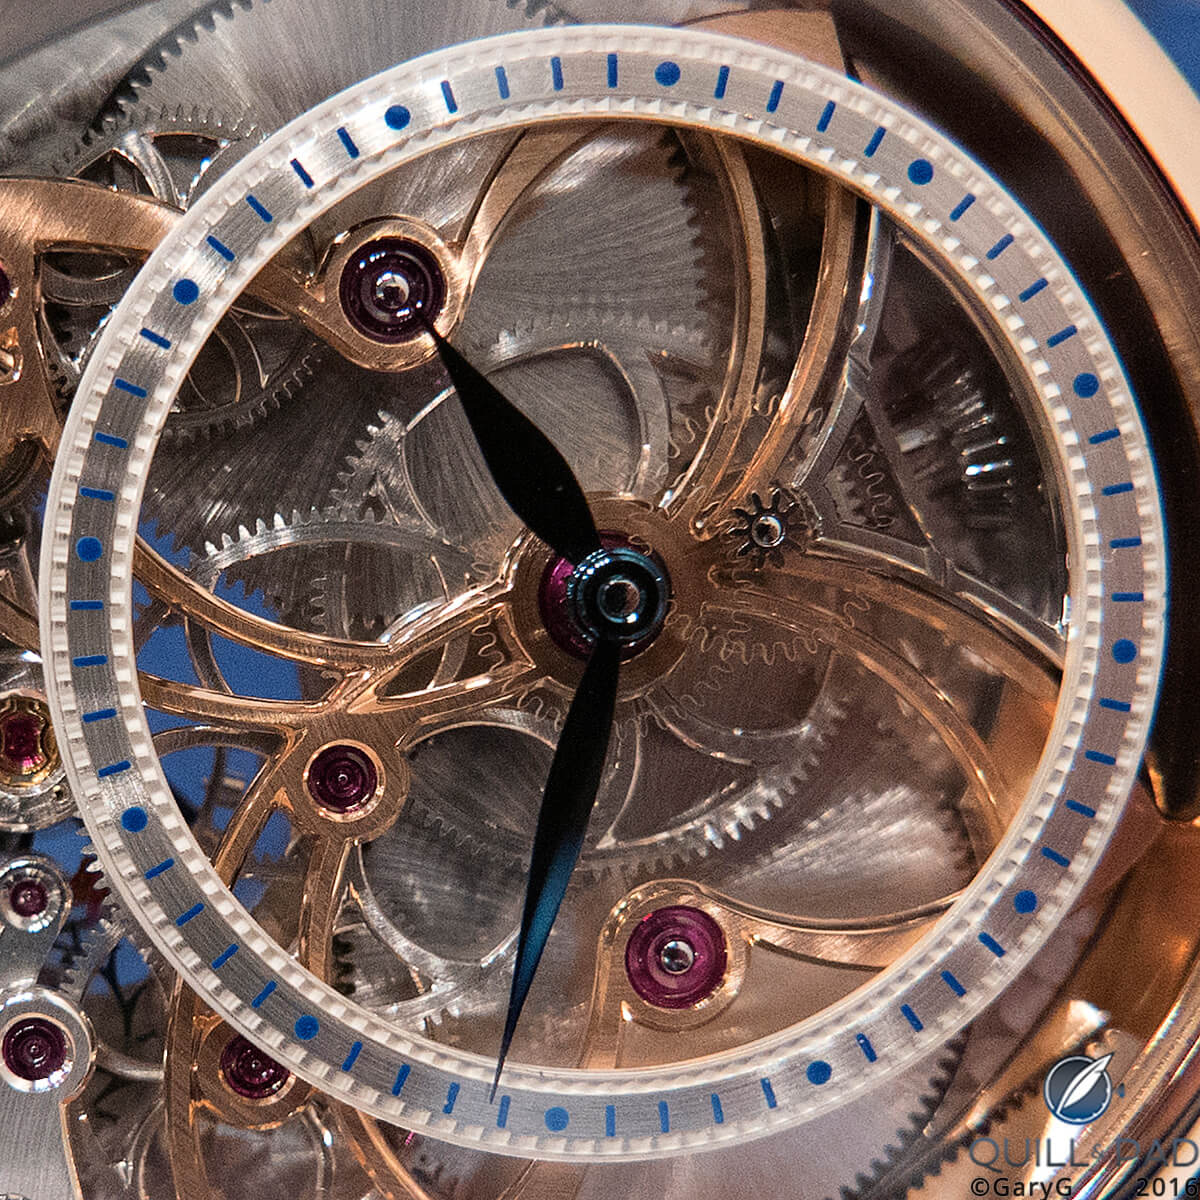 Dial close-up of the Andreas Strehler Papillon d’Or